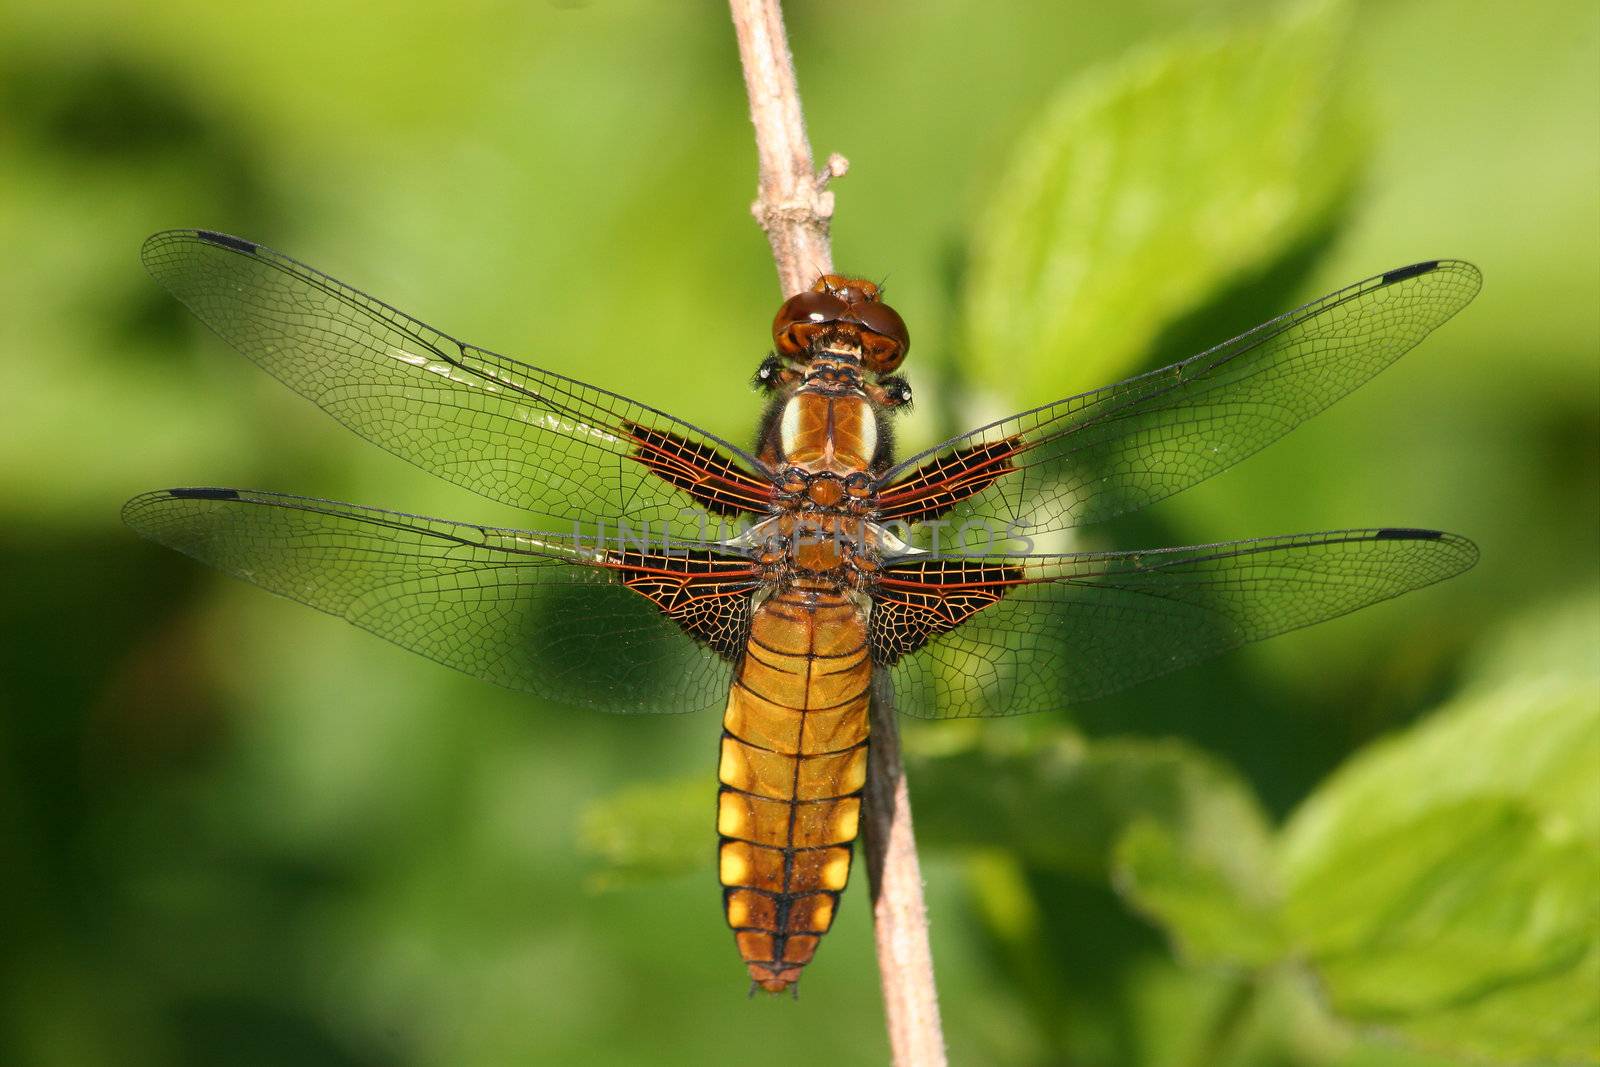 Broad-bodied Chaser (Libellula depressa) by tdietrich